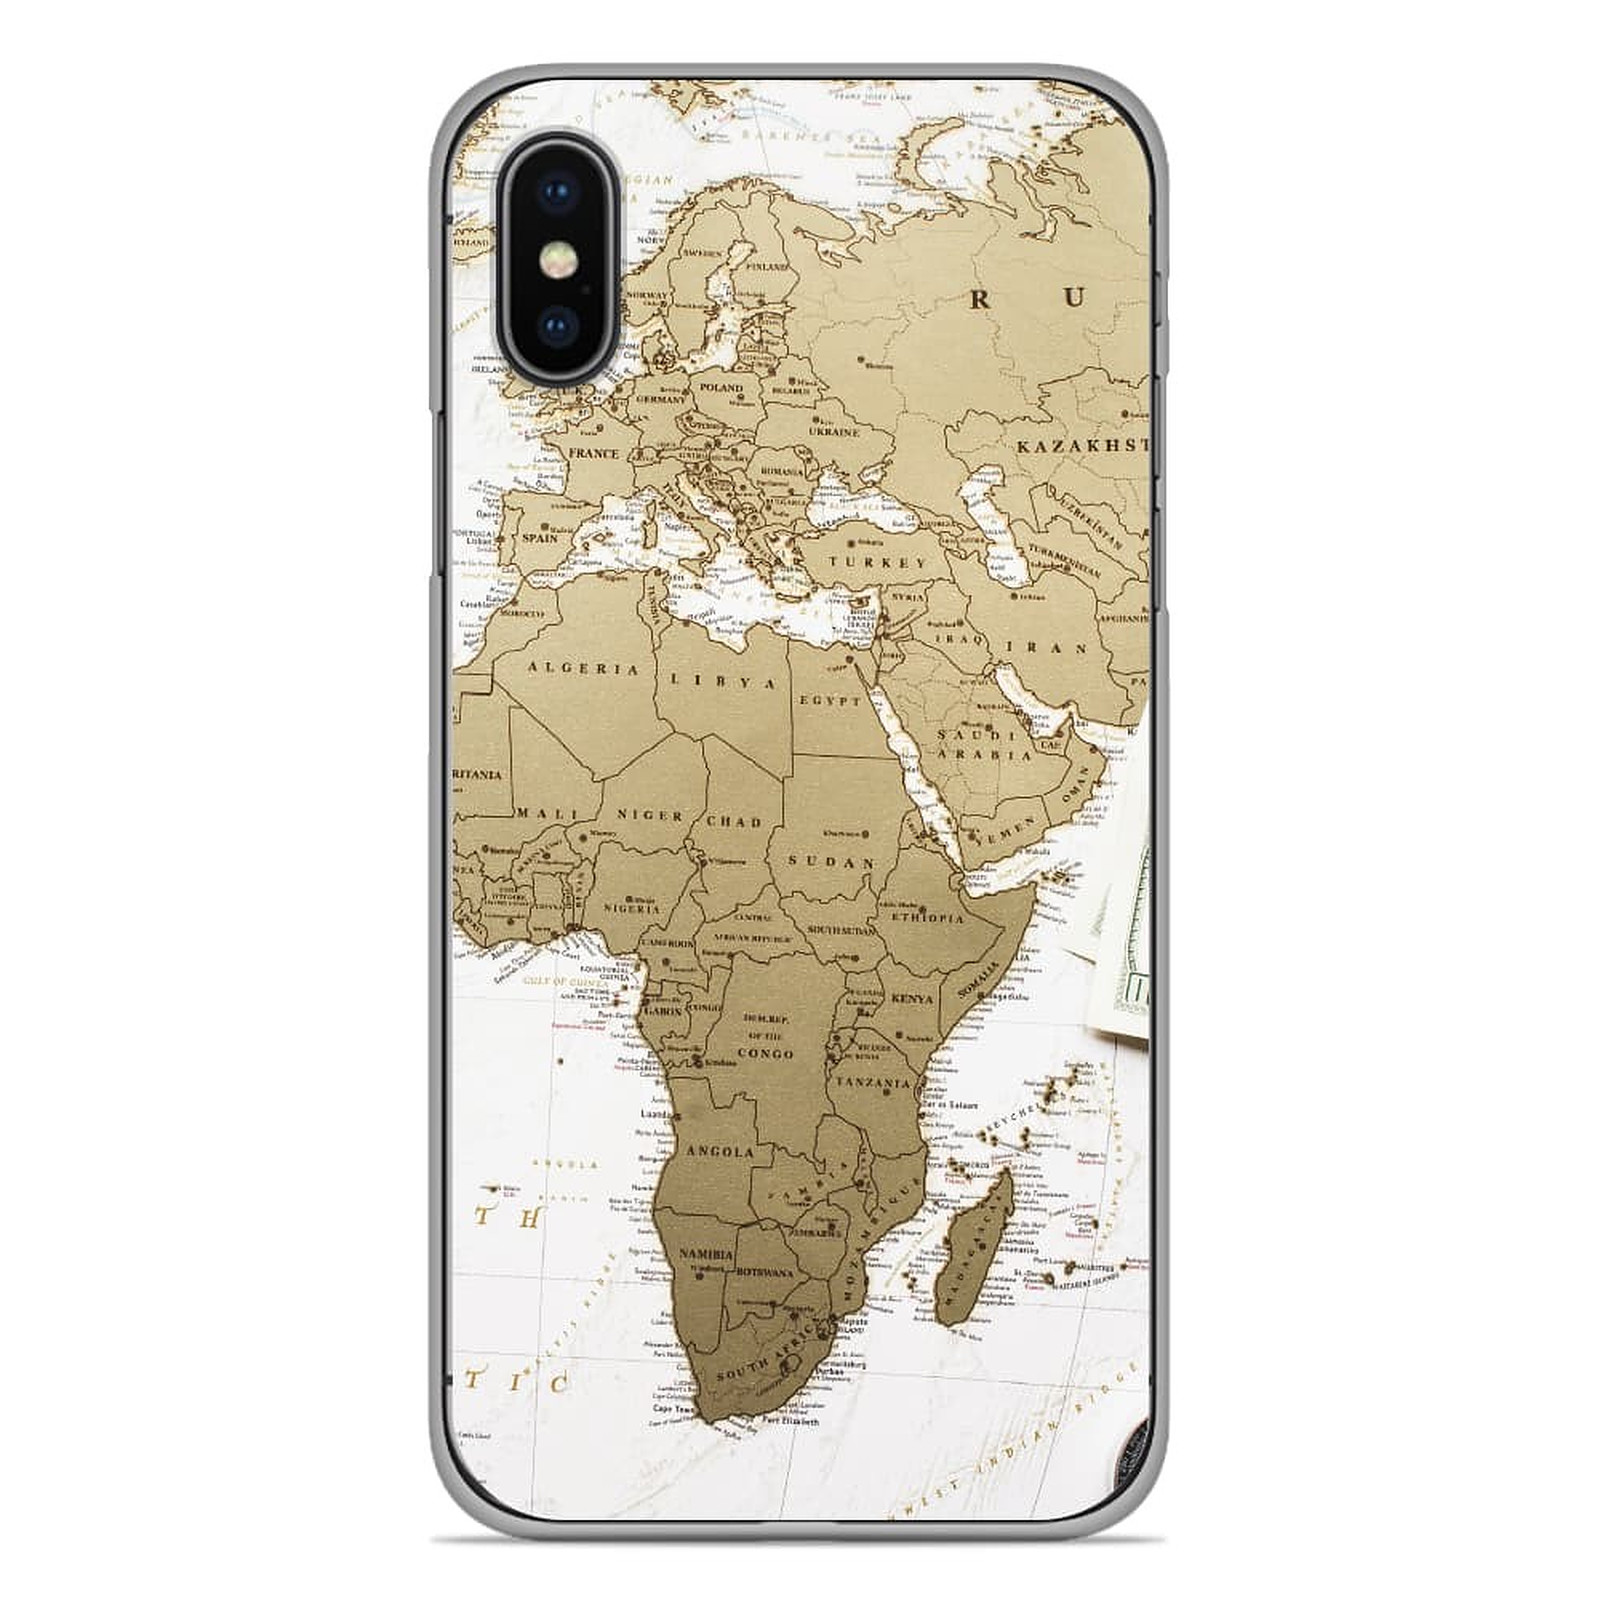 1001 Coques Coque silicone gel Apple iPhone X / XS motif Map Europe Afrique - Coque telephone 1001Coques